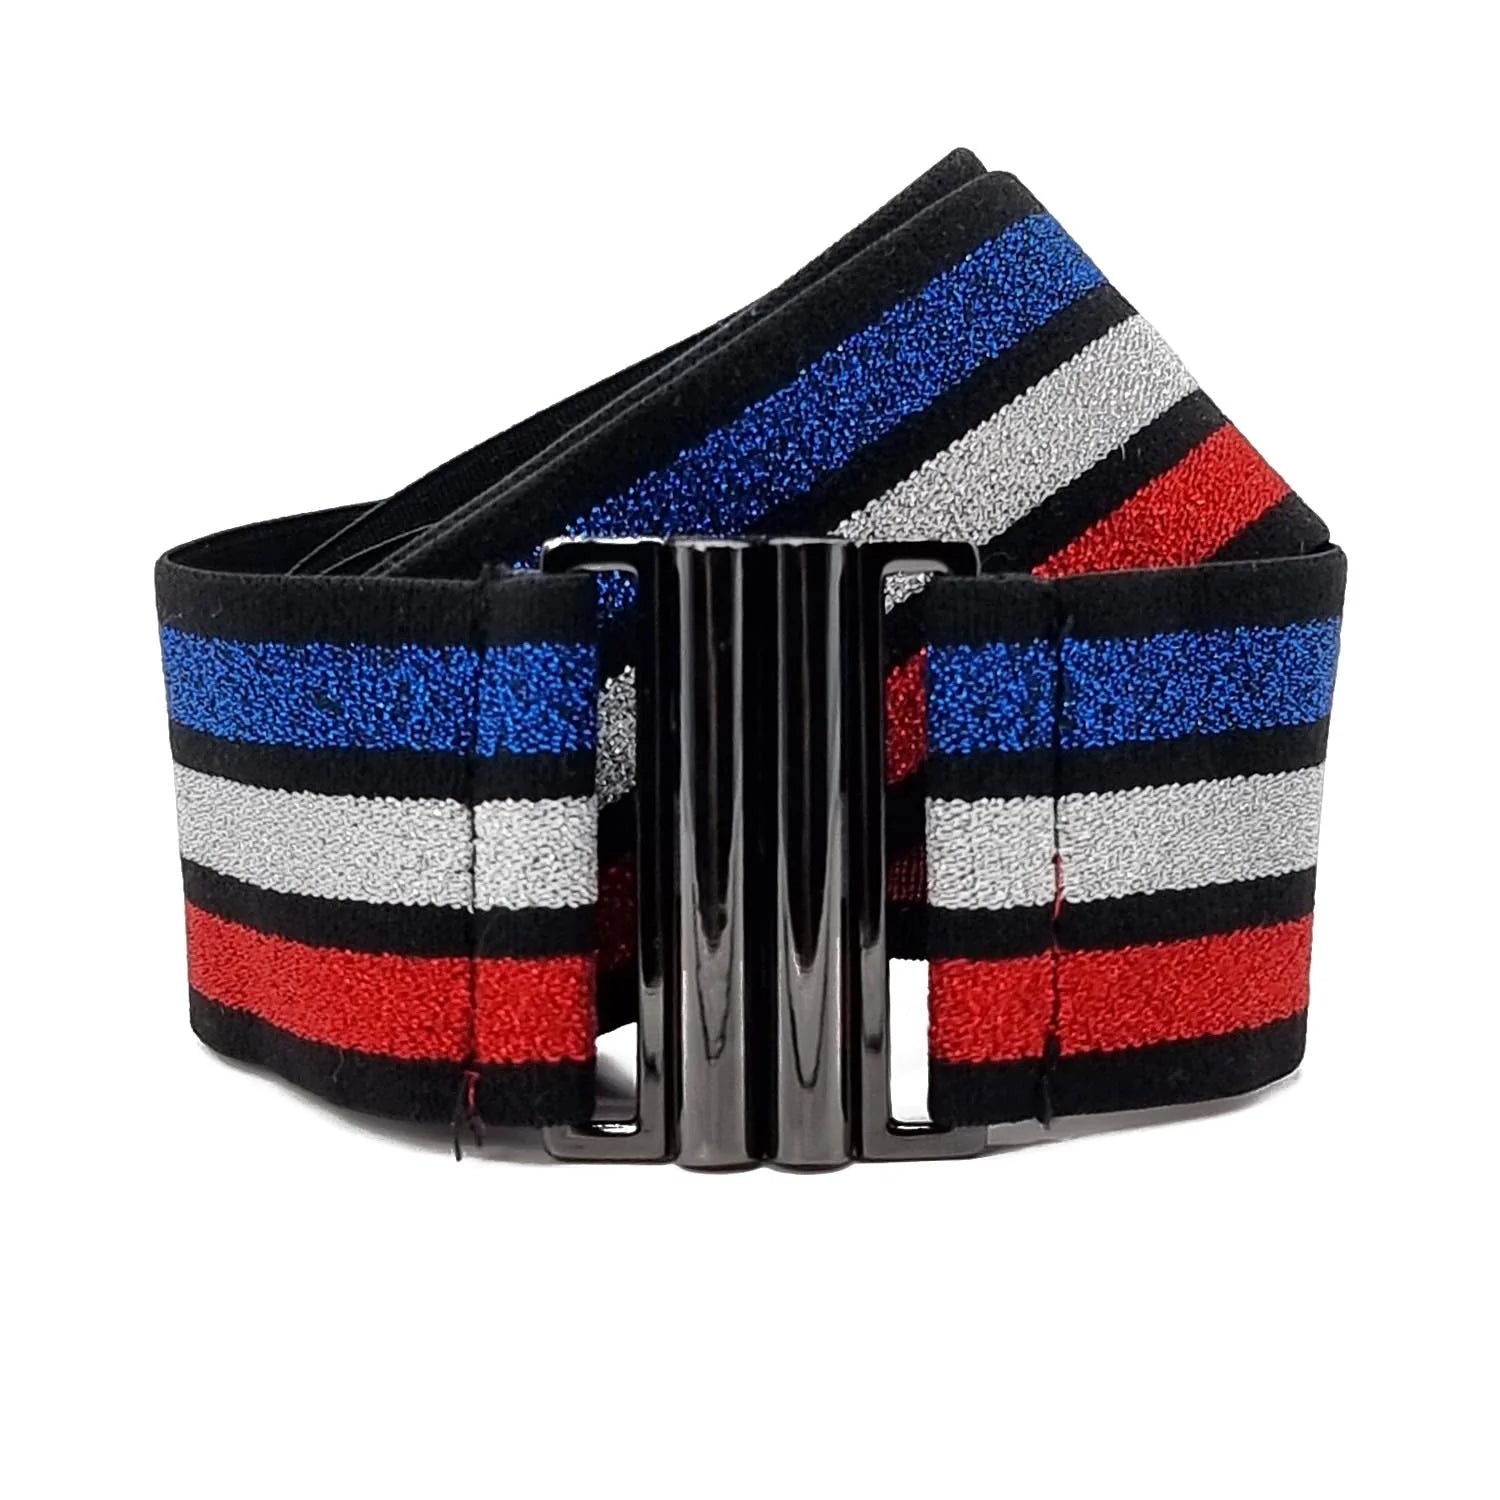 Stretchy belt in colourful stripes with metallic fastener.